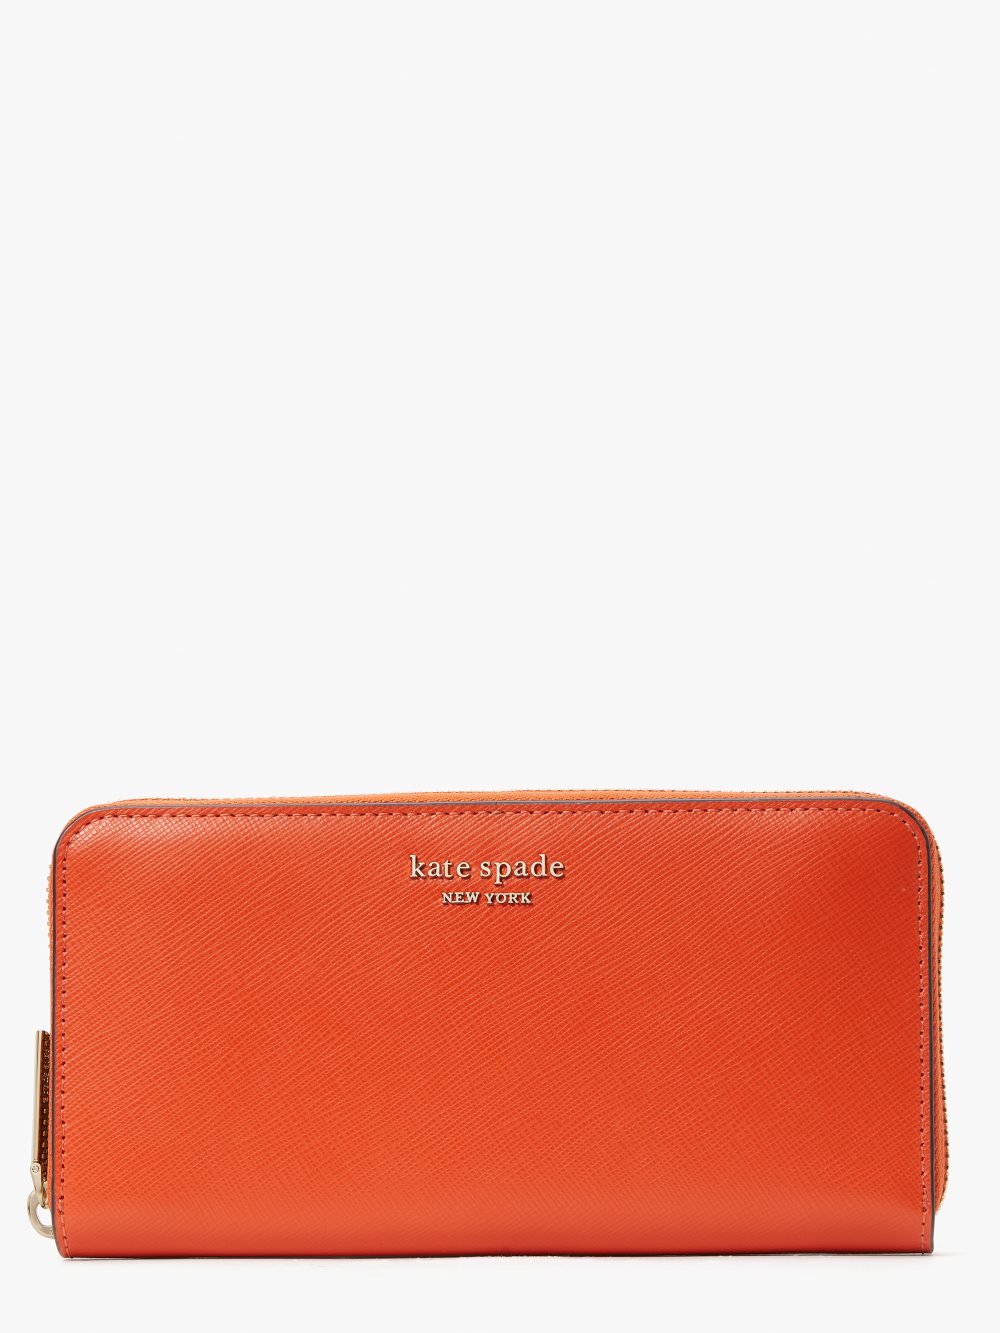 Women's dried apricot spencer zip-around continental wallet | Kate Spade